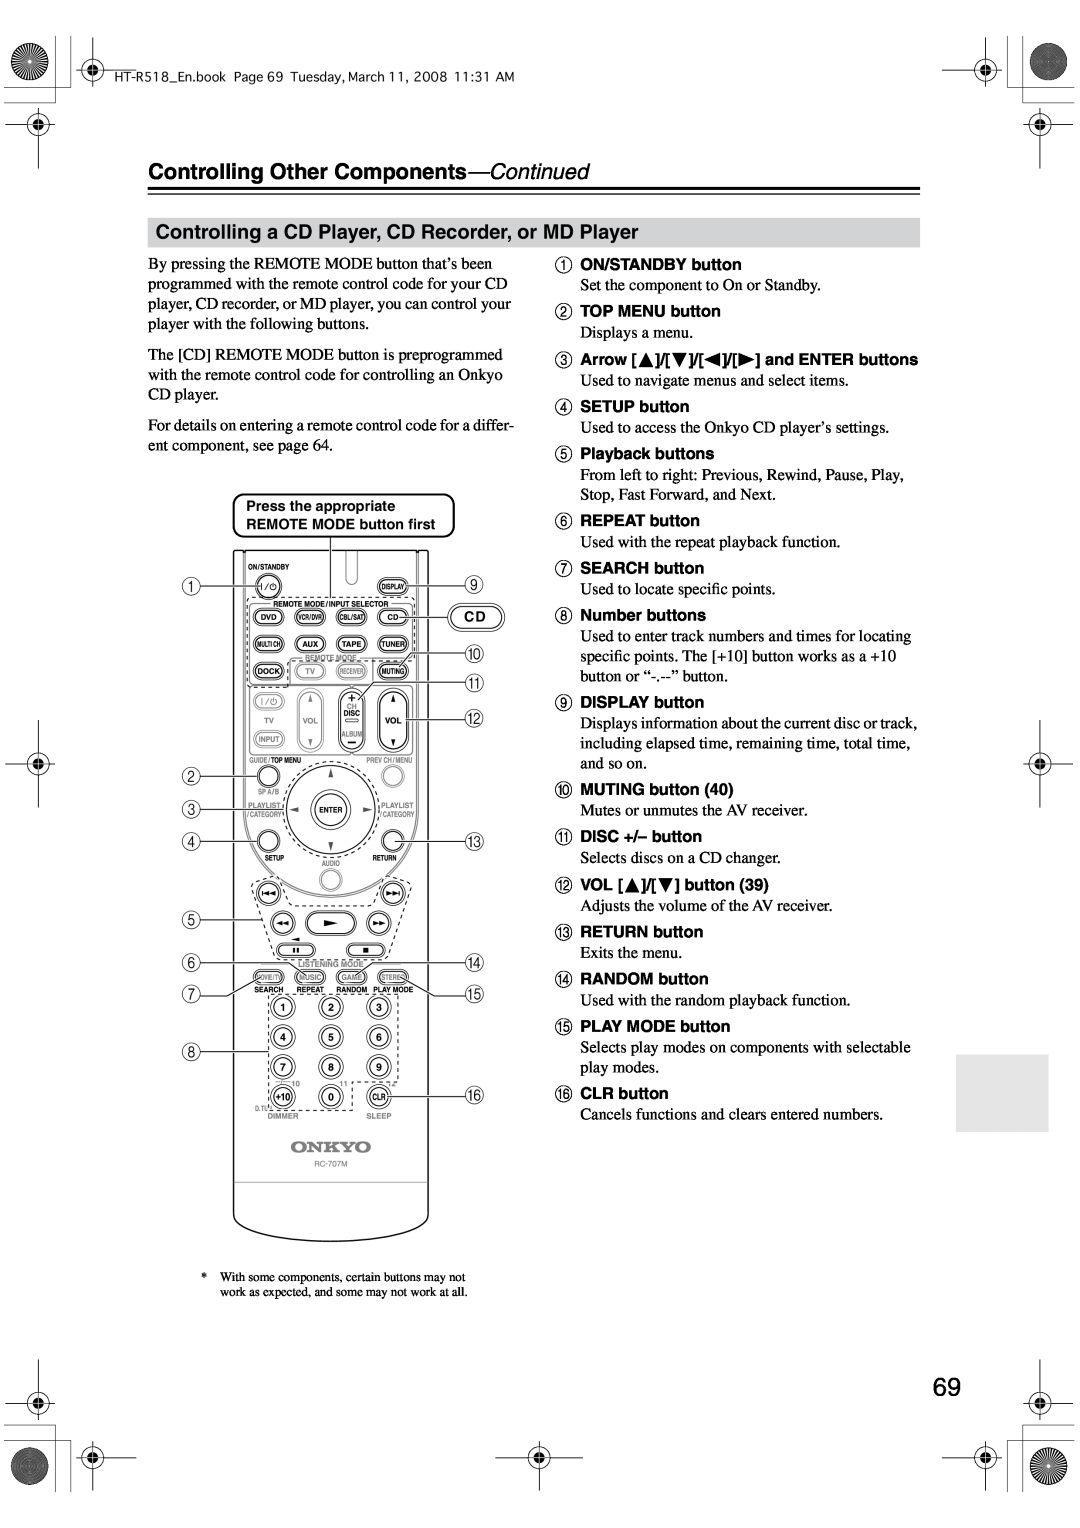 Onkyo HT-R518 instruction manual Controlling Other Components-Continued, J K L 